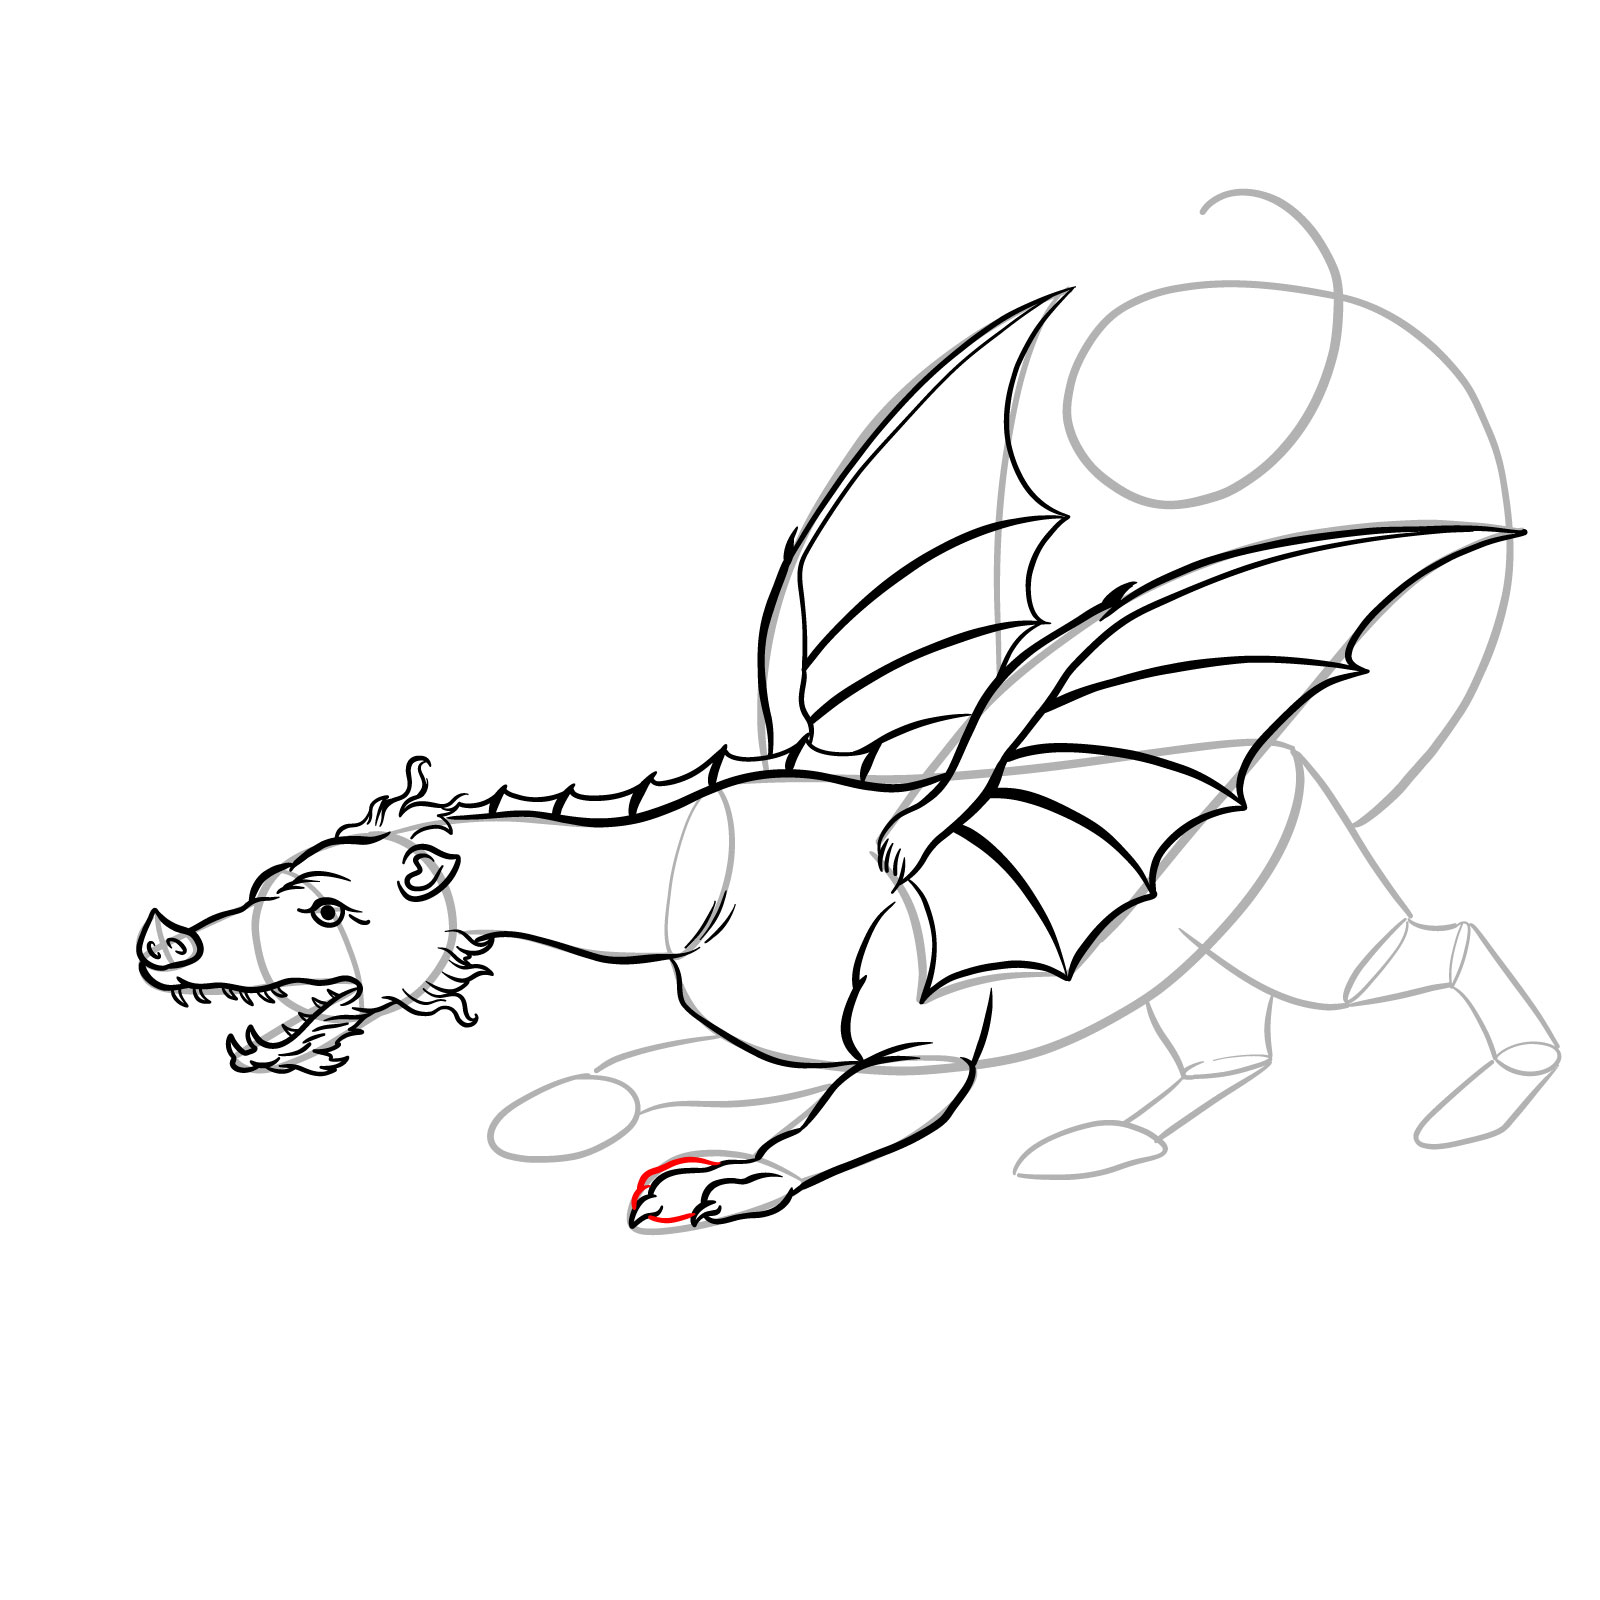 How to draw a classic European dragon - step 28